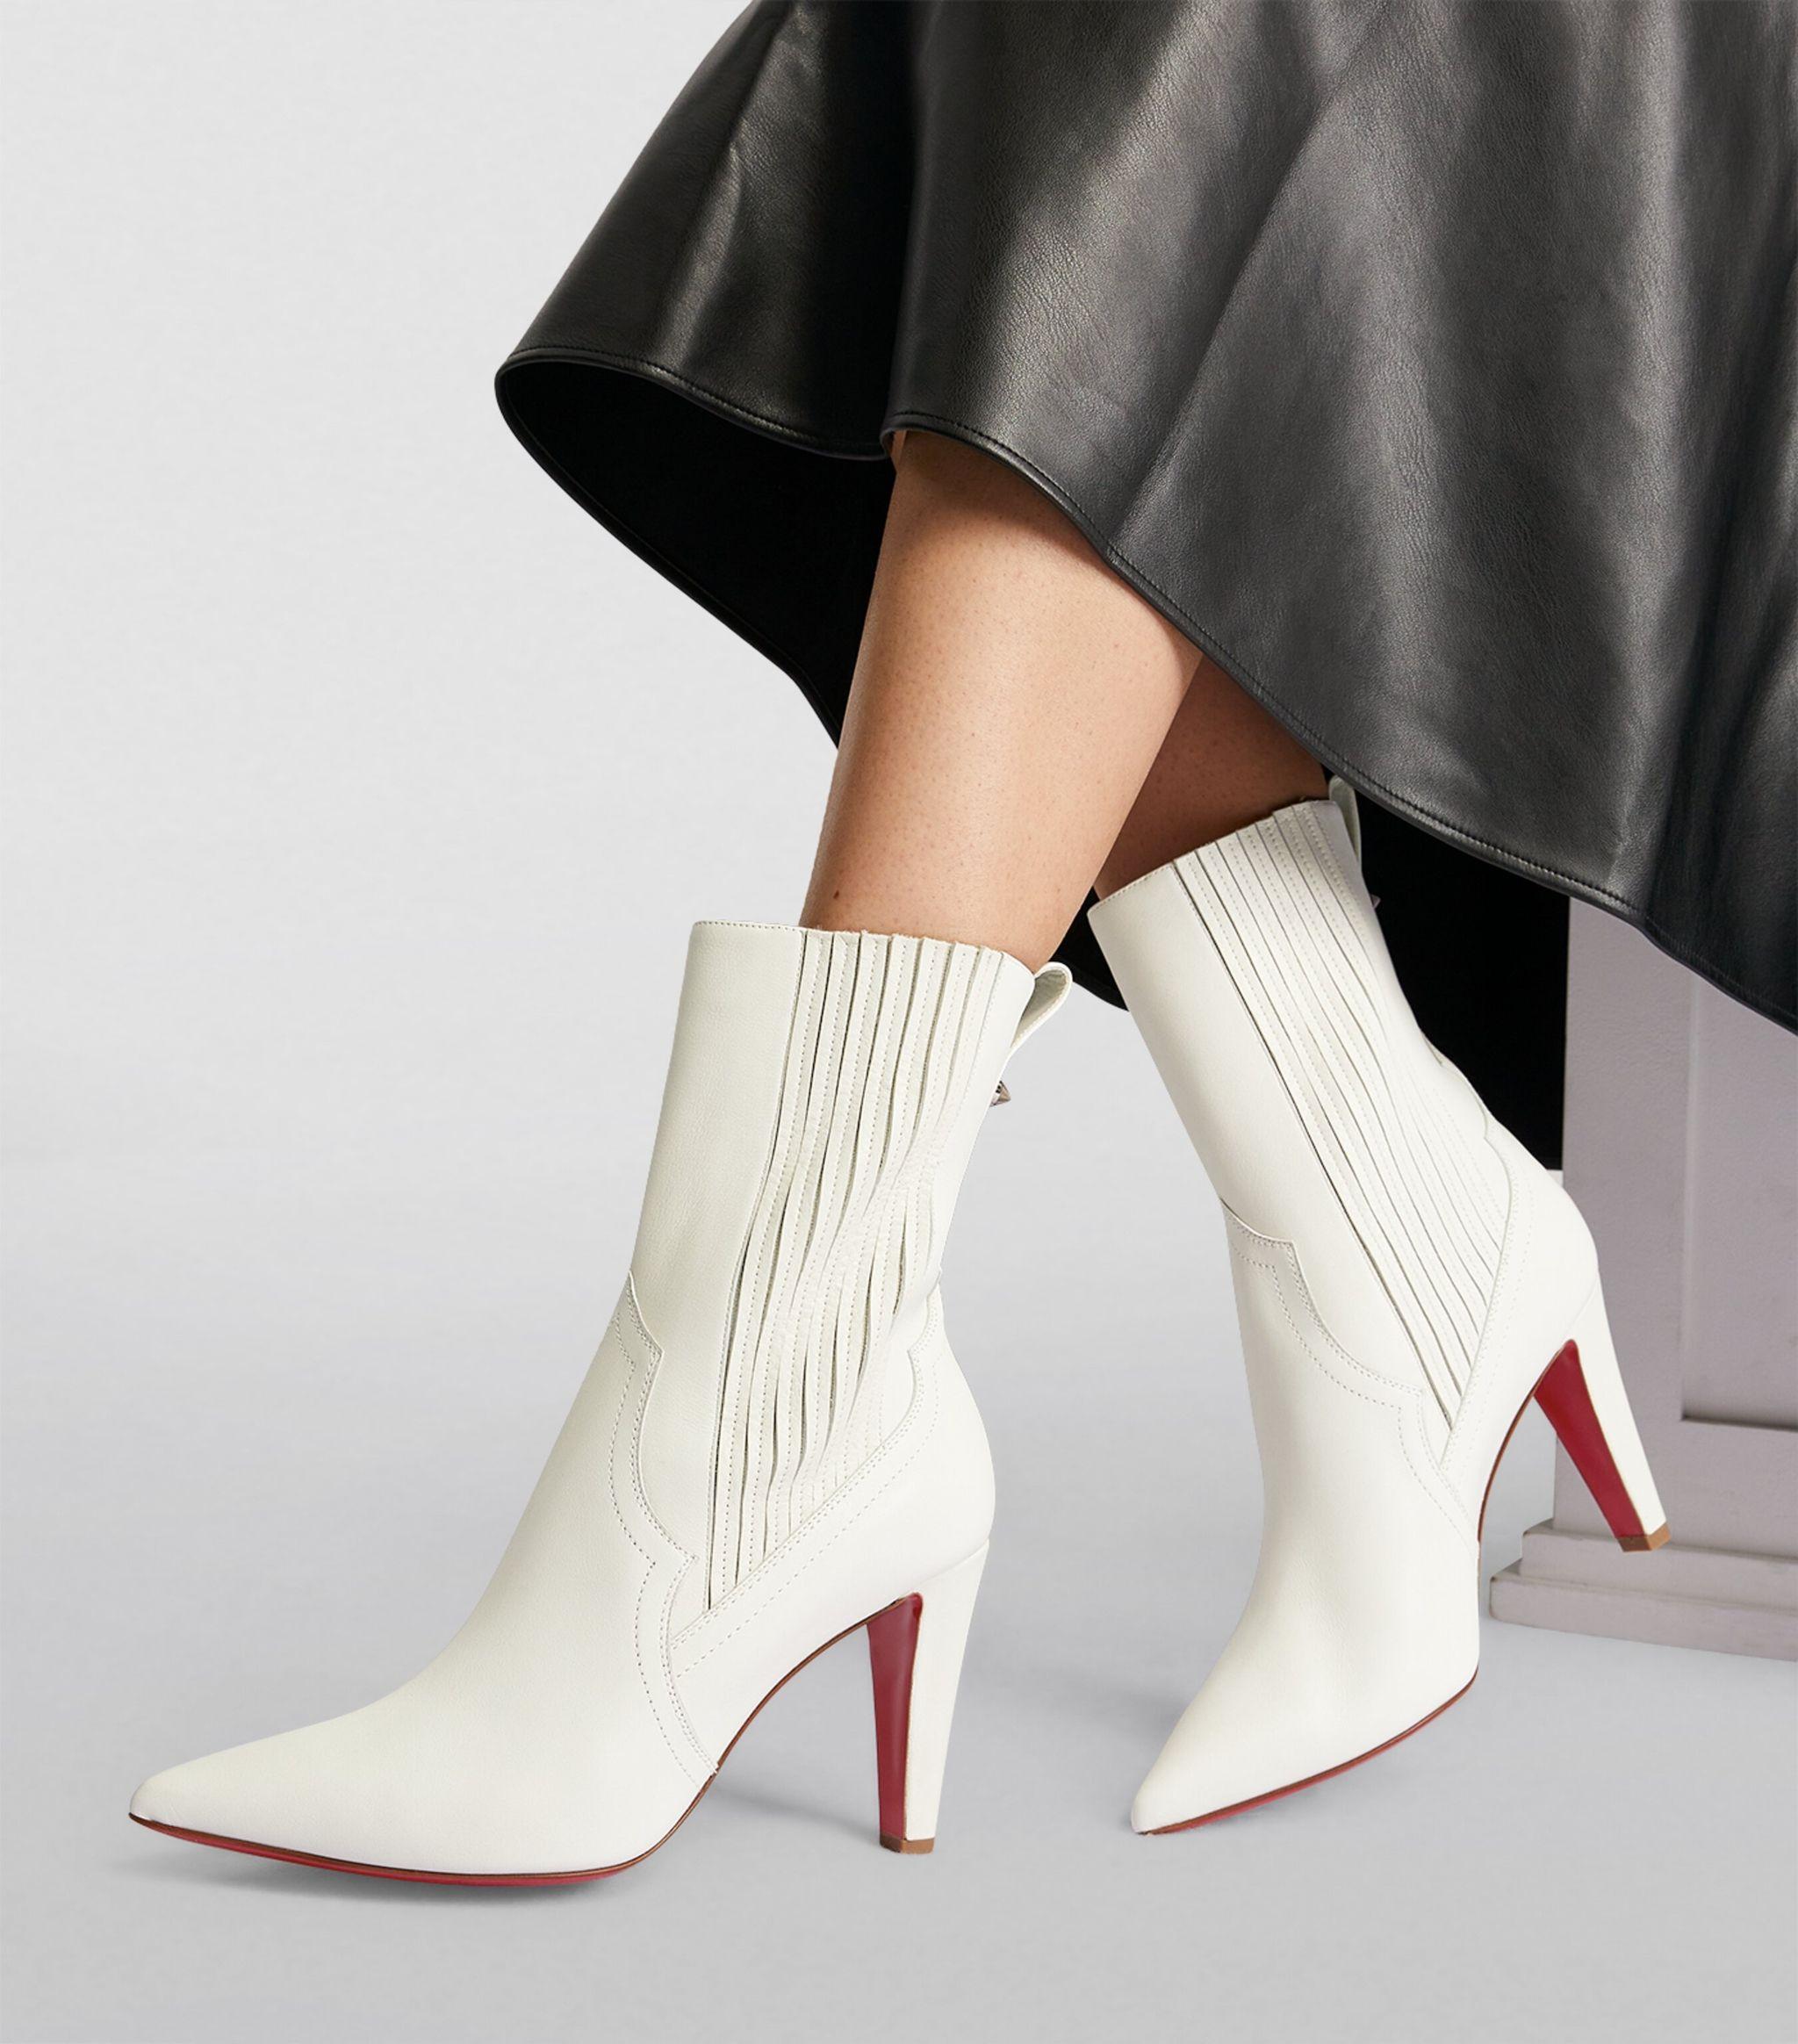 Christian Louboutin Santigag Leather Ankle Boots 85 in White